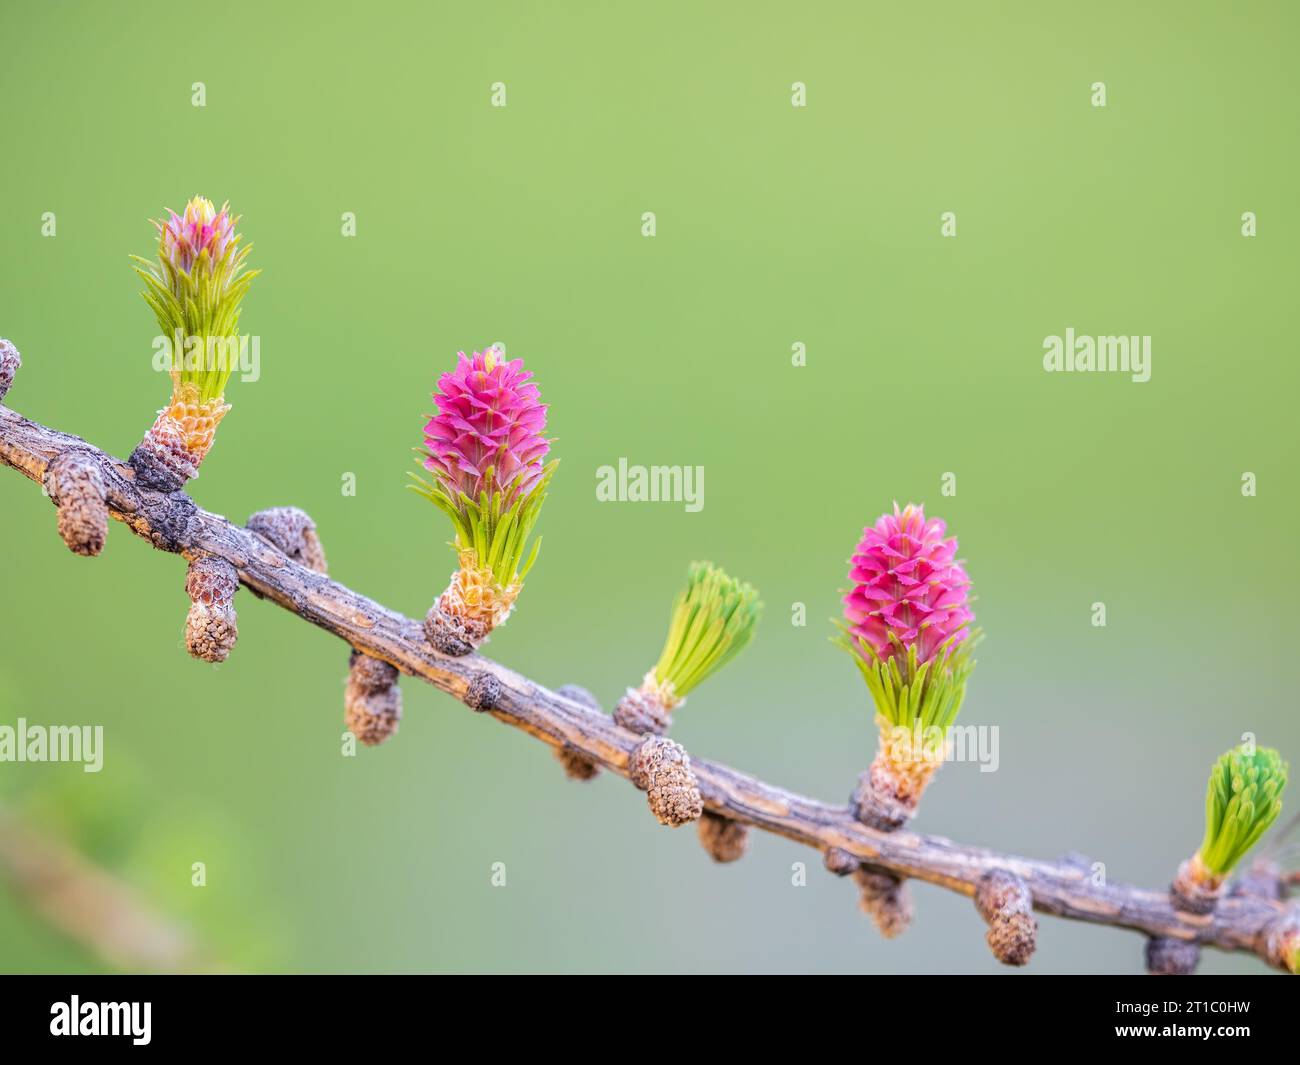 Larch tree fresh pink cones blossom at spring on nature background. Branches with young needles European larch Larix decidua with pink flowers. Stock Photo